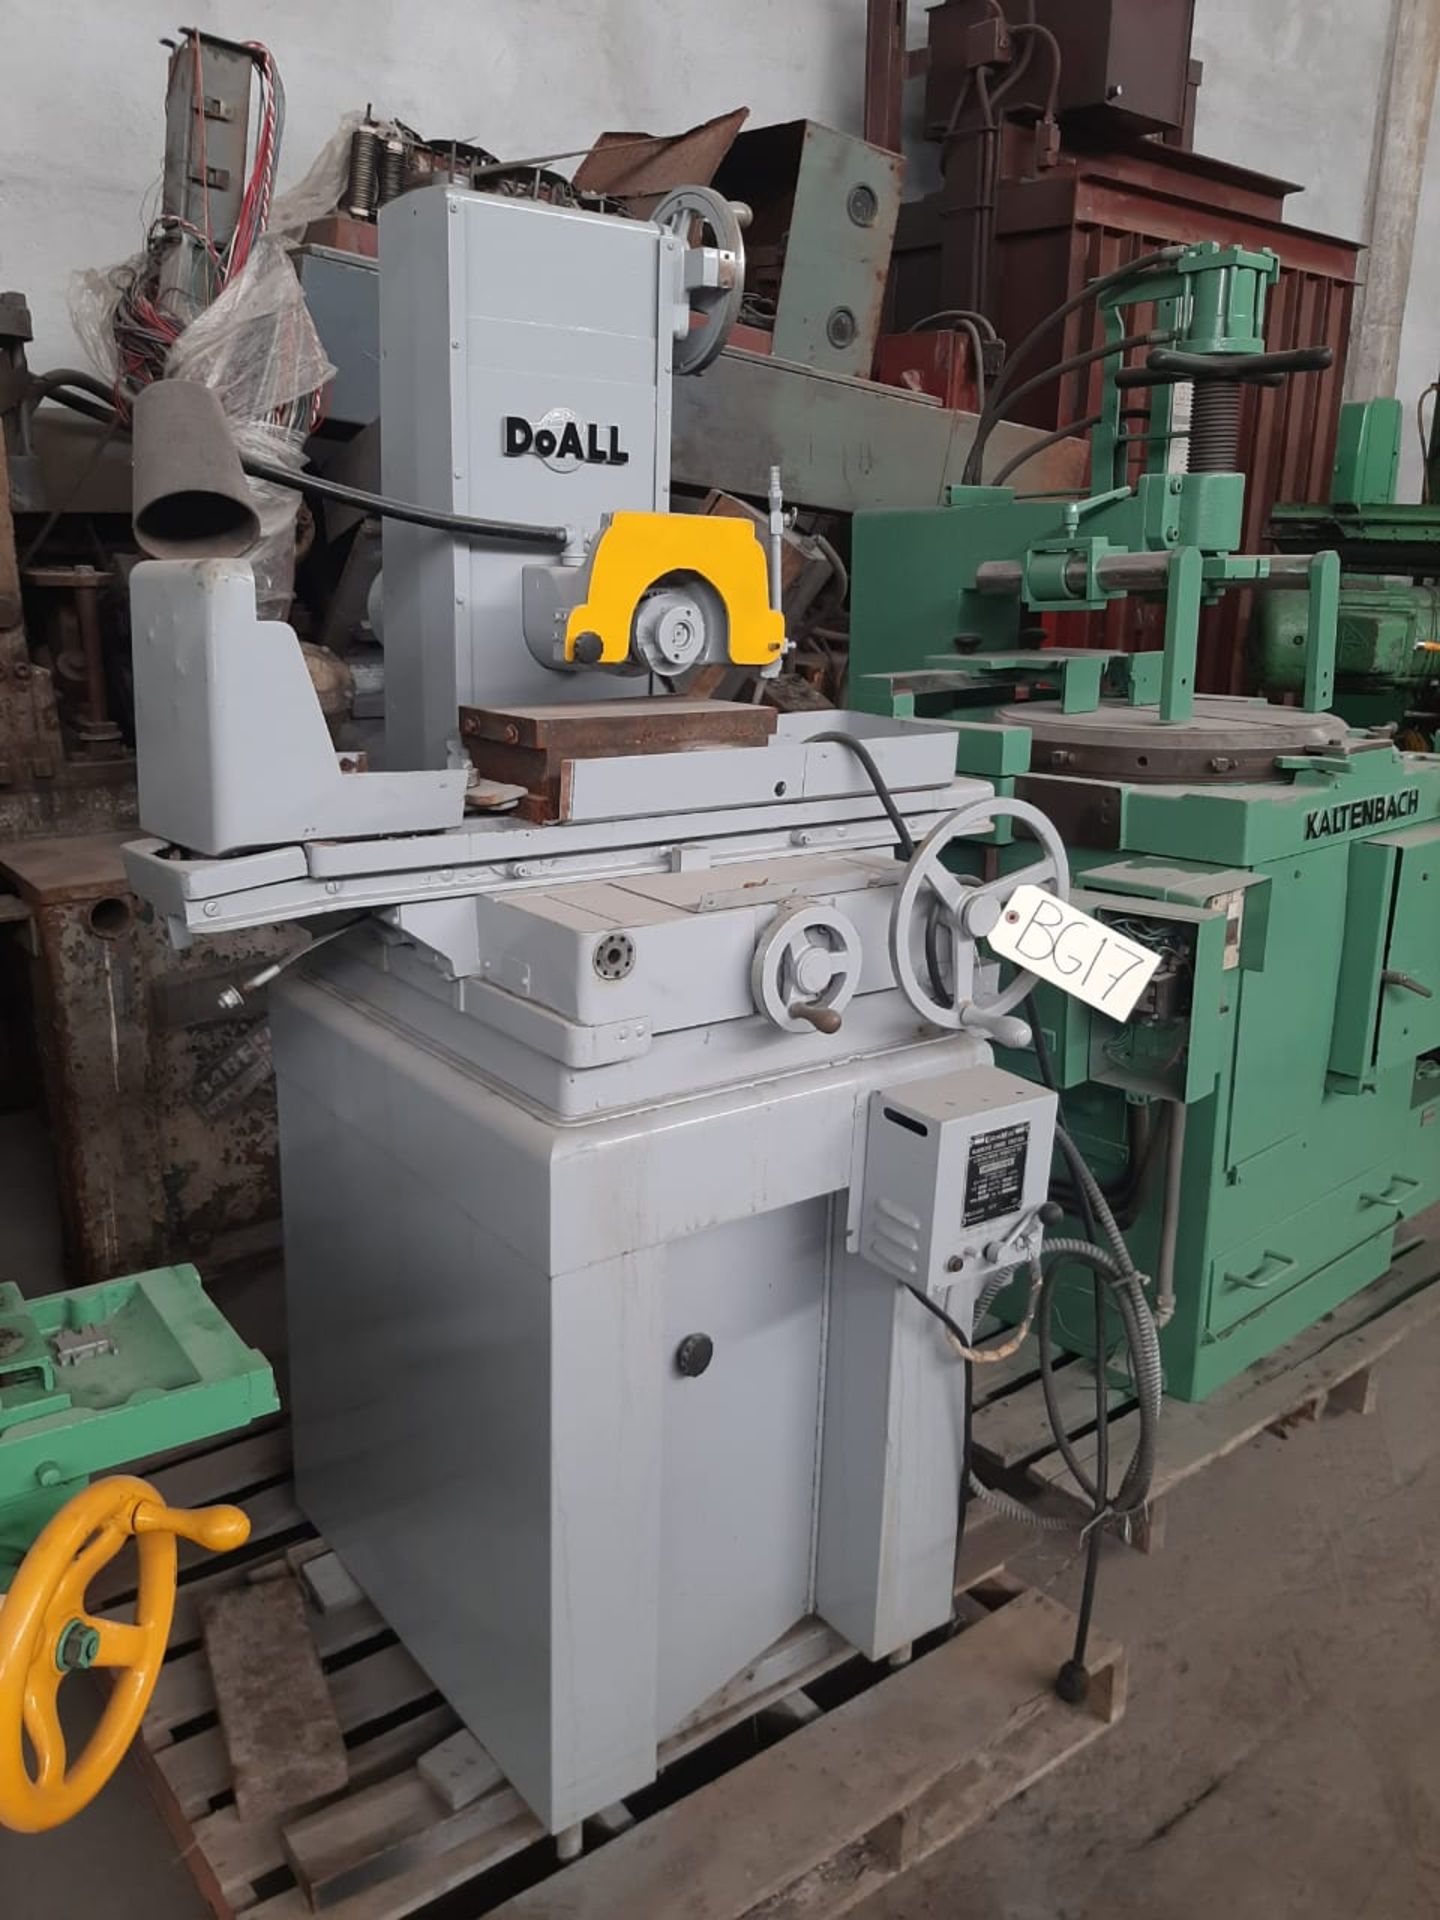 DoALL Super Precision grinder spindle Model MD 6 S/N 2758 6" x 12" Motor R&M 220/440 volts 1HP 3PH - Image 3 of 8